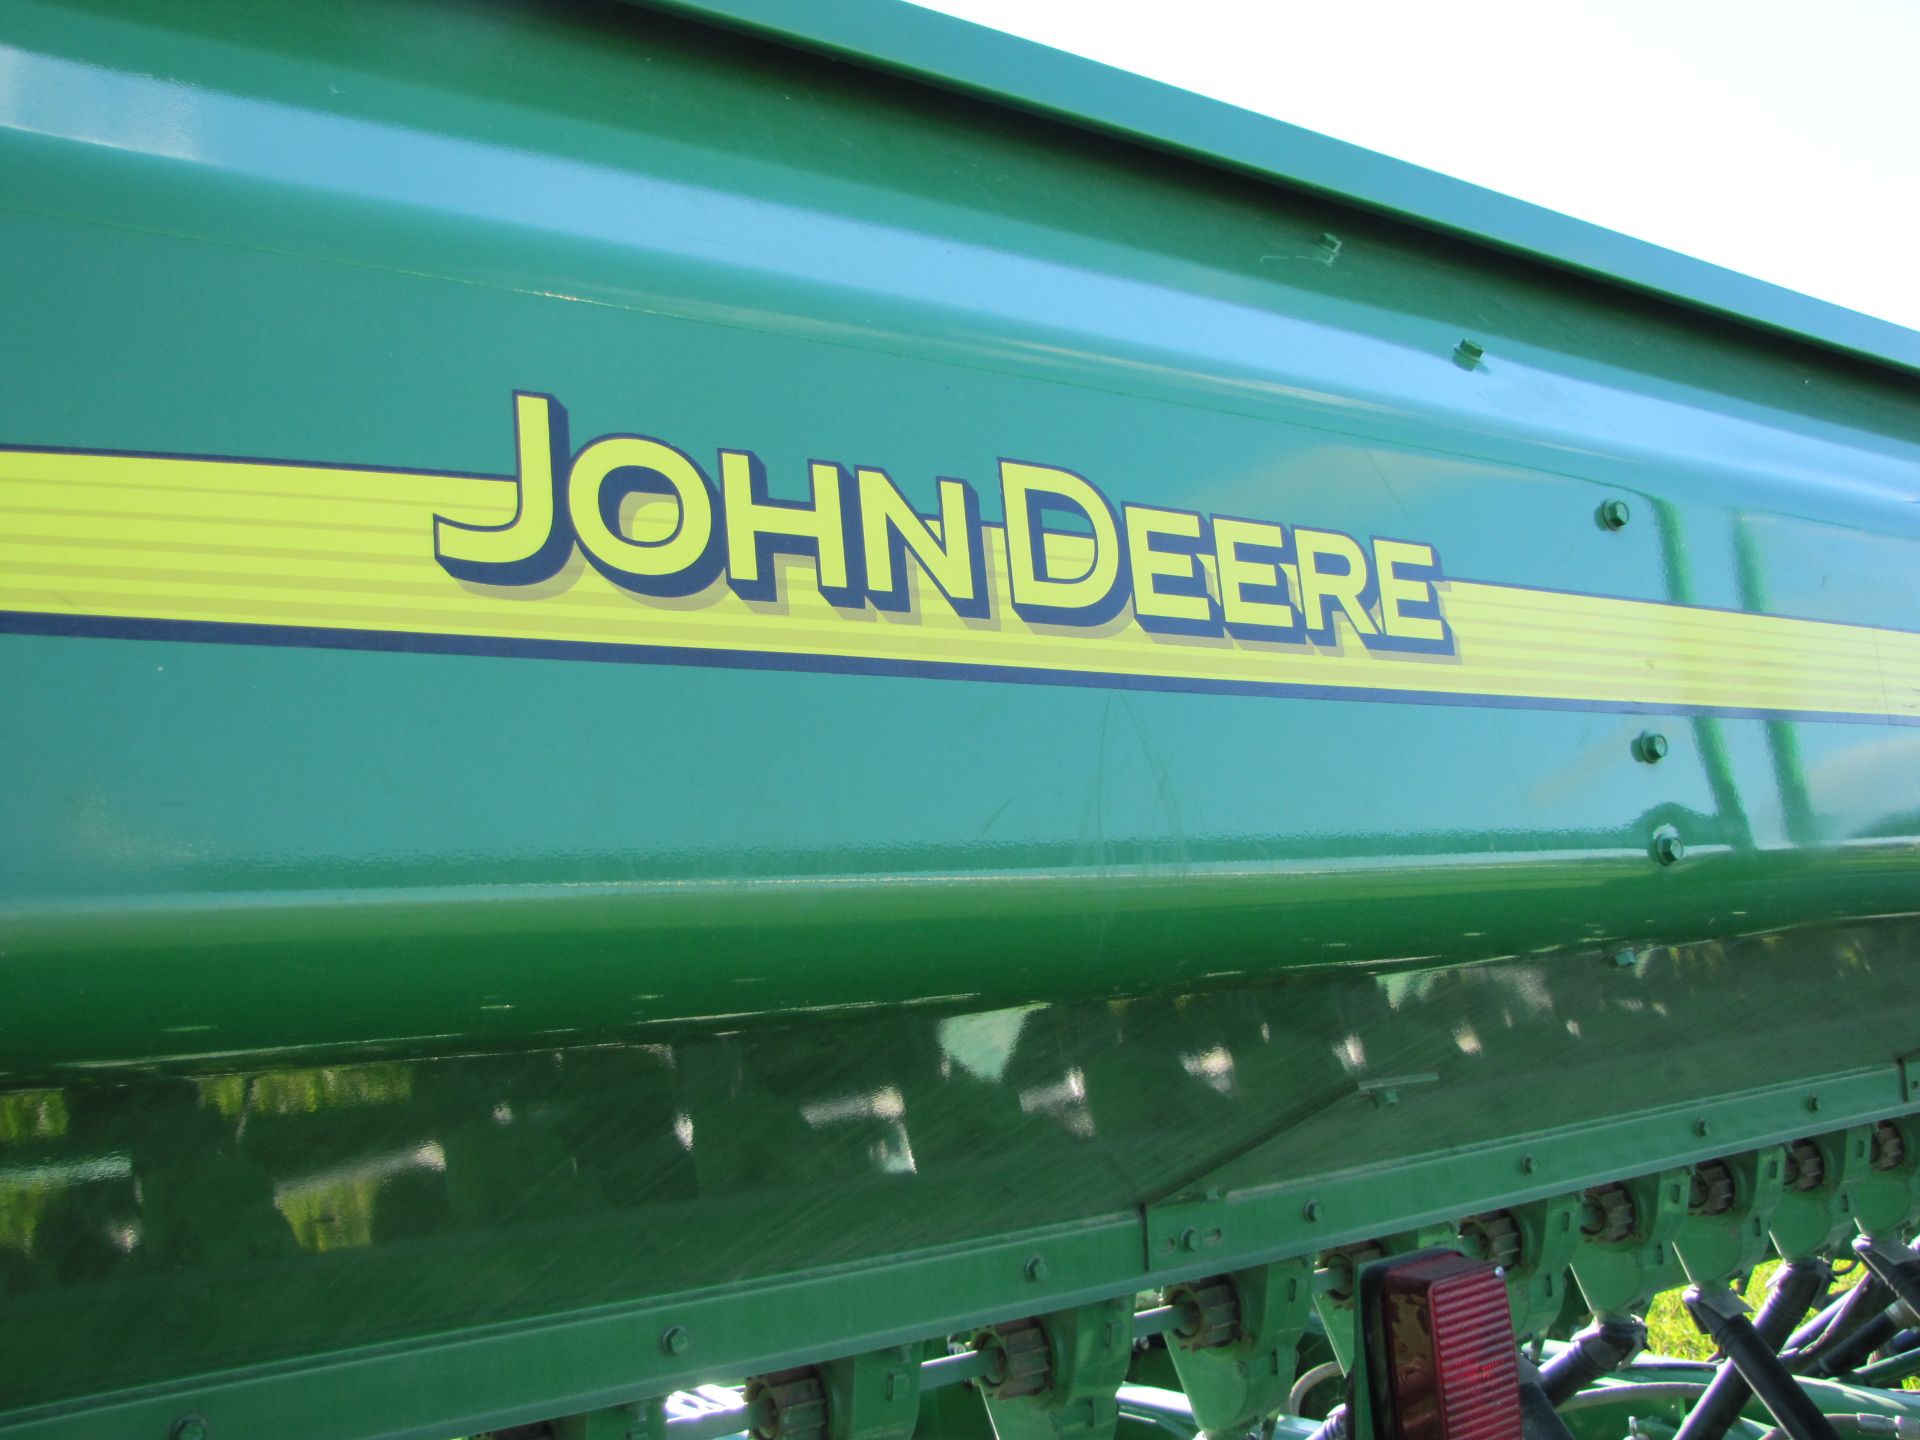 15’ John Deere 1590 no-till drill, elec rate controller, 7 ½” spacing, markers, wired for monitor - Image 19 of 33